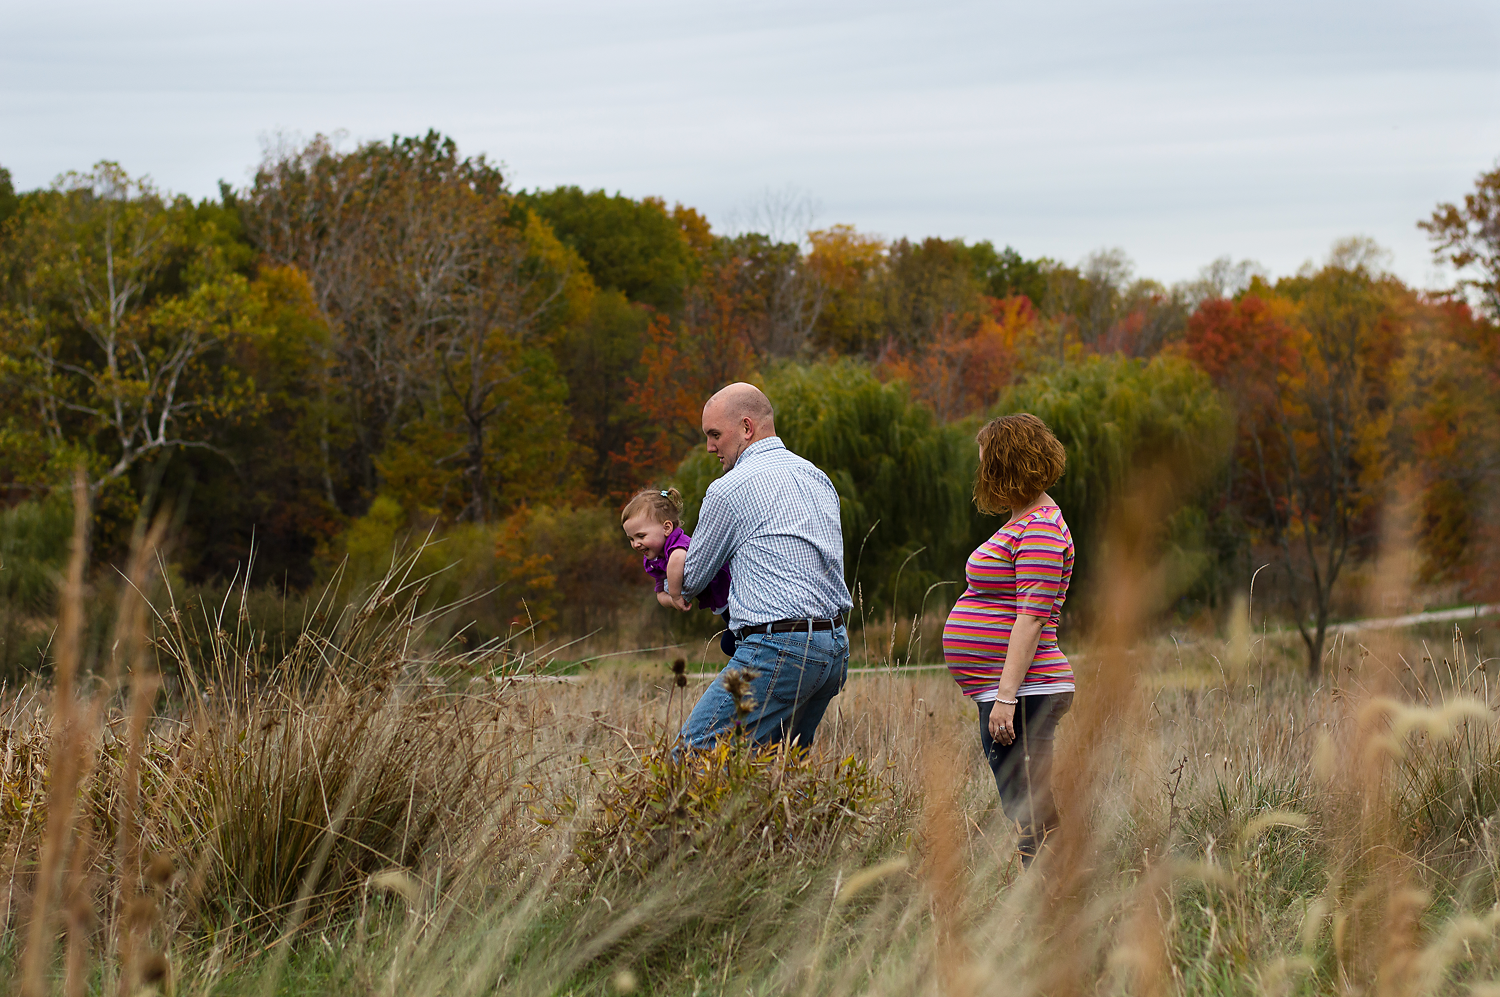 outdoor-maternity-photography-west-creek-reservation-family-fun-at-the-photoshoot-dad-spinning-his-little-girl-with-pregnant-mom-watches-them.png